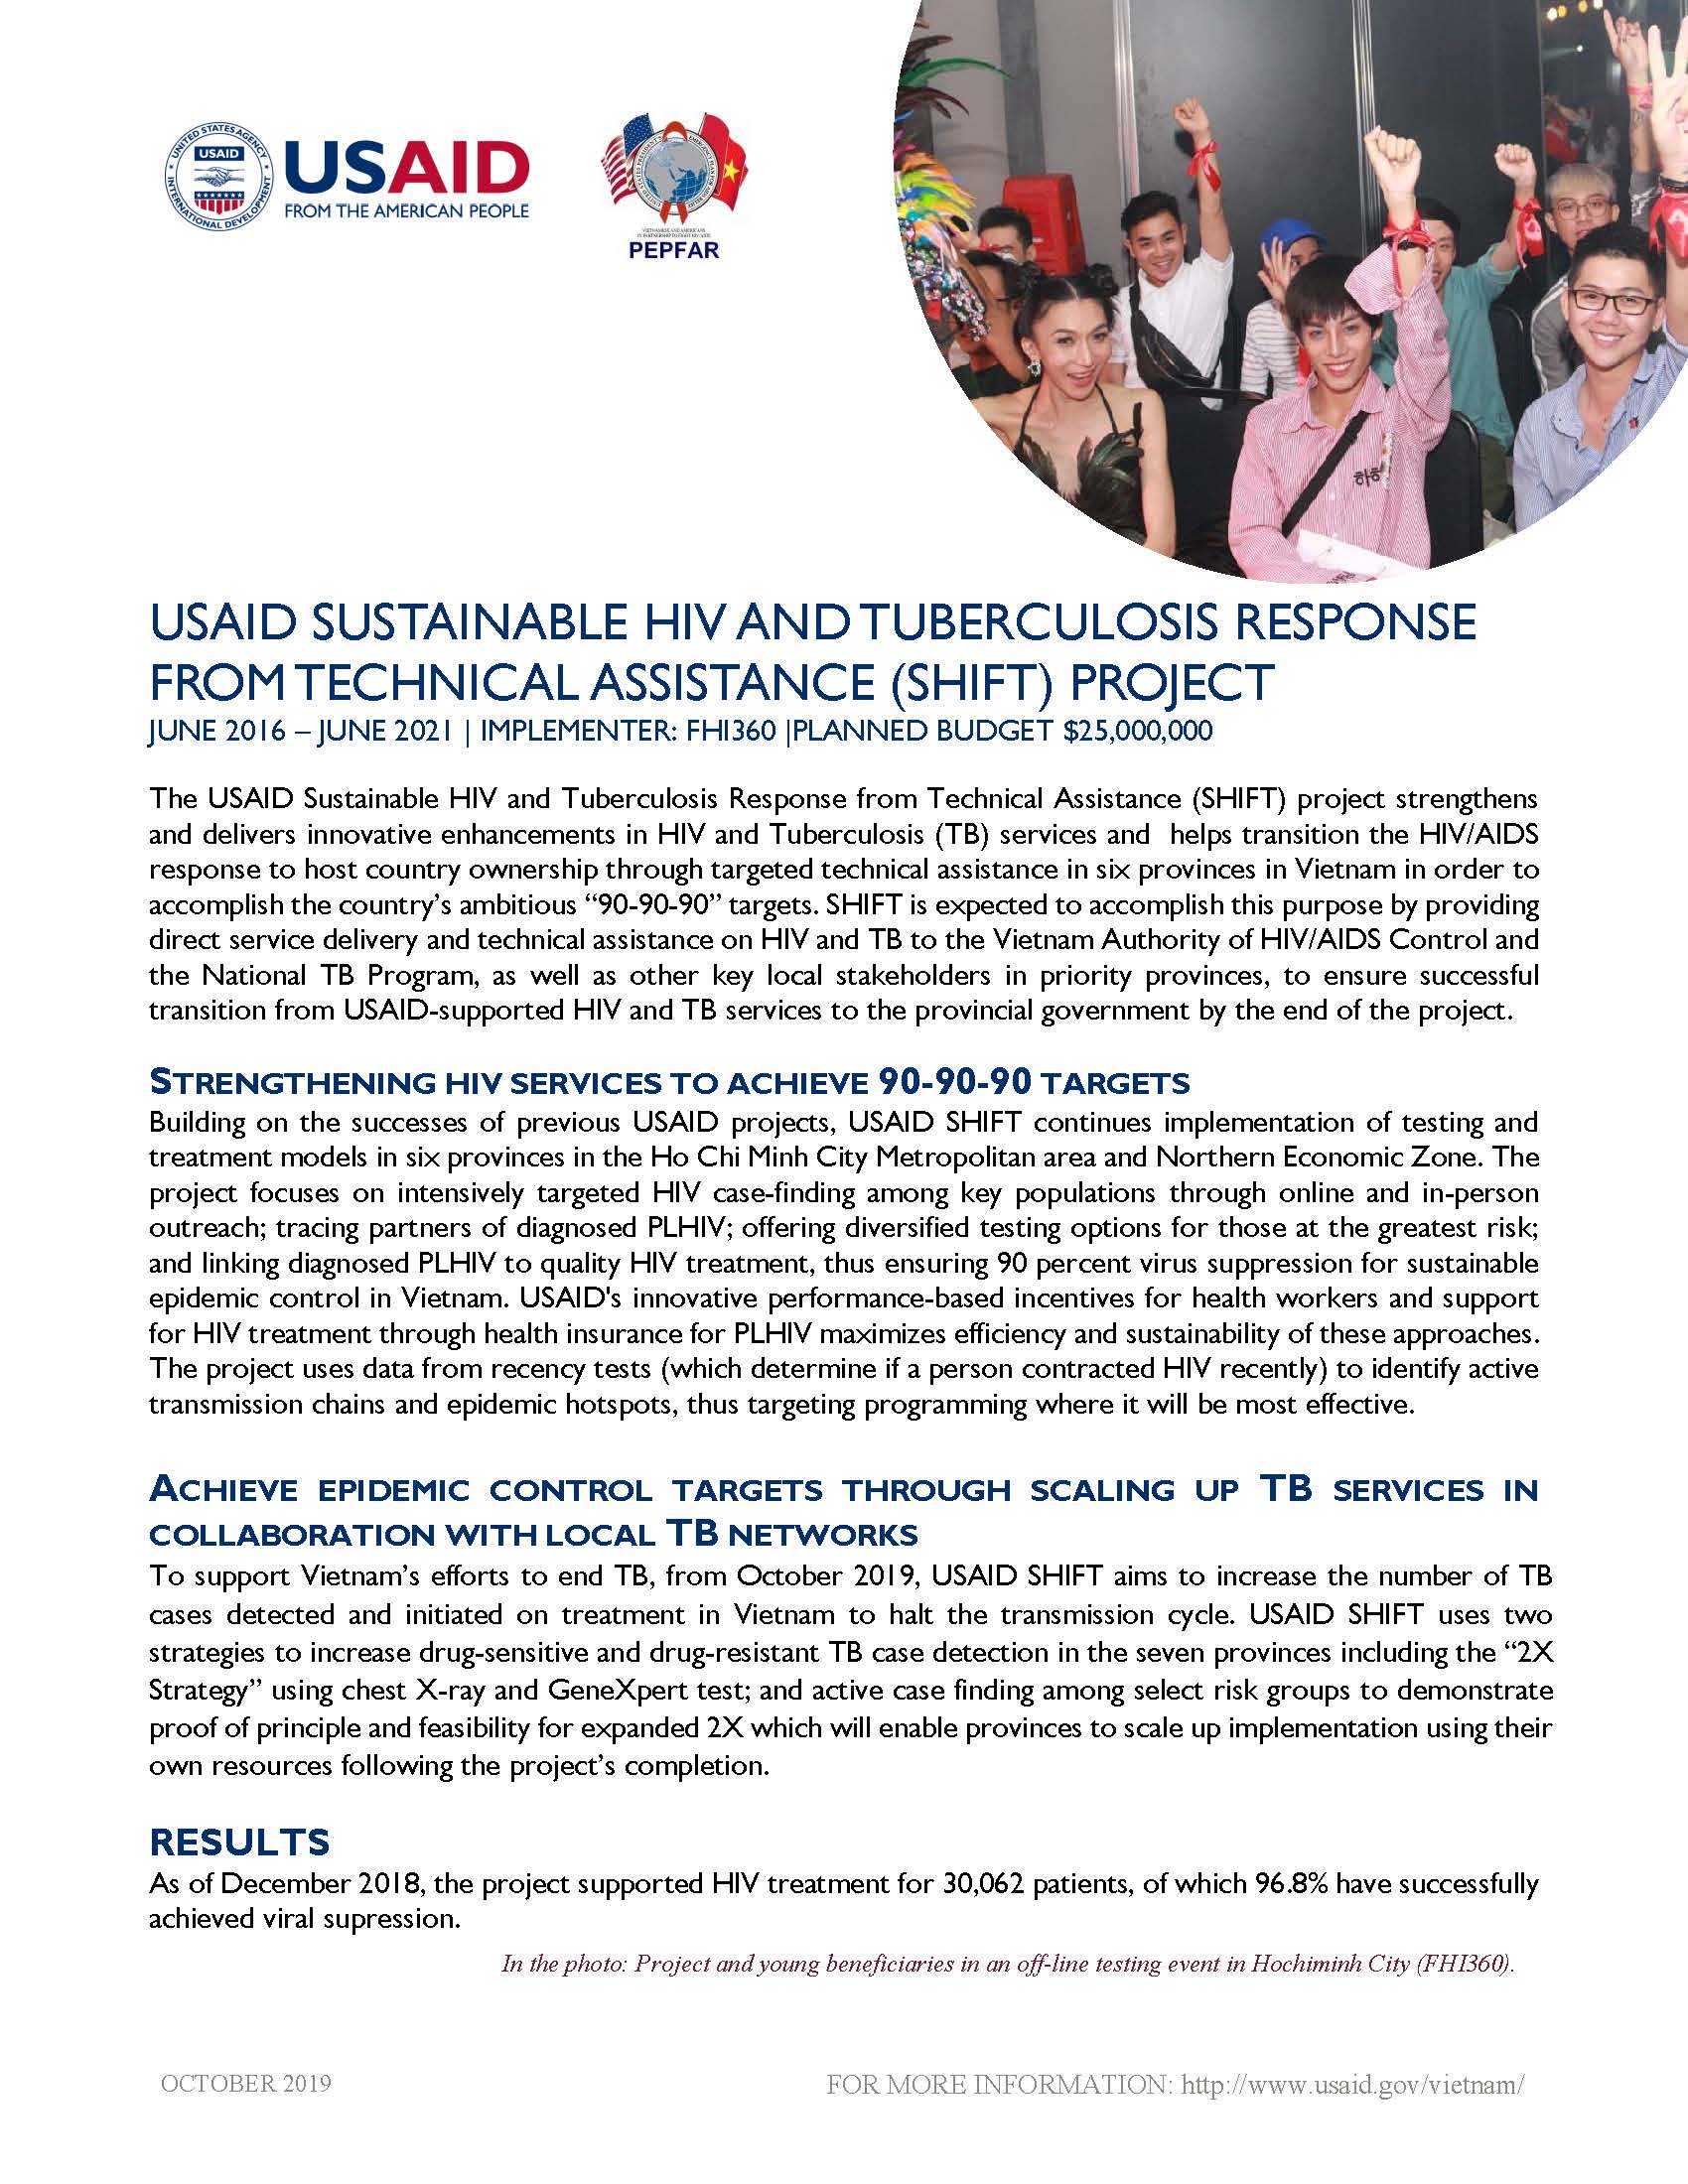 USAID Sustainable HIV and Tuberculosis Response from Technical Assistance (SHIFT) project